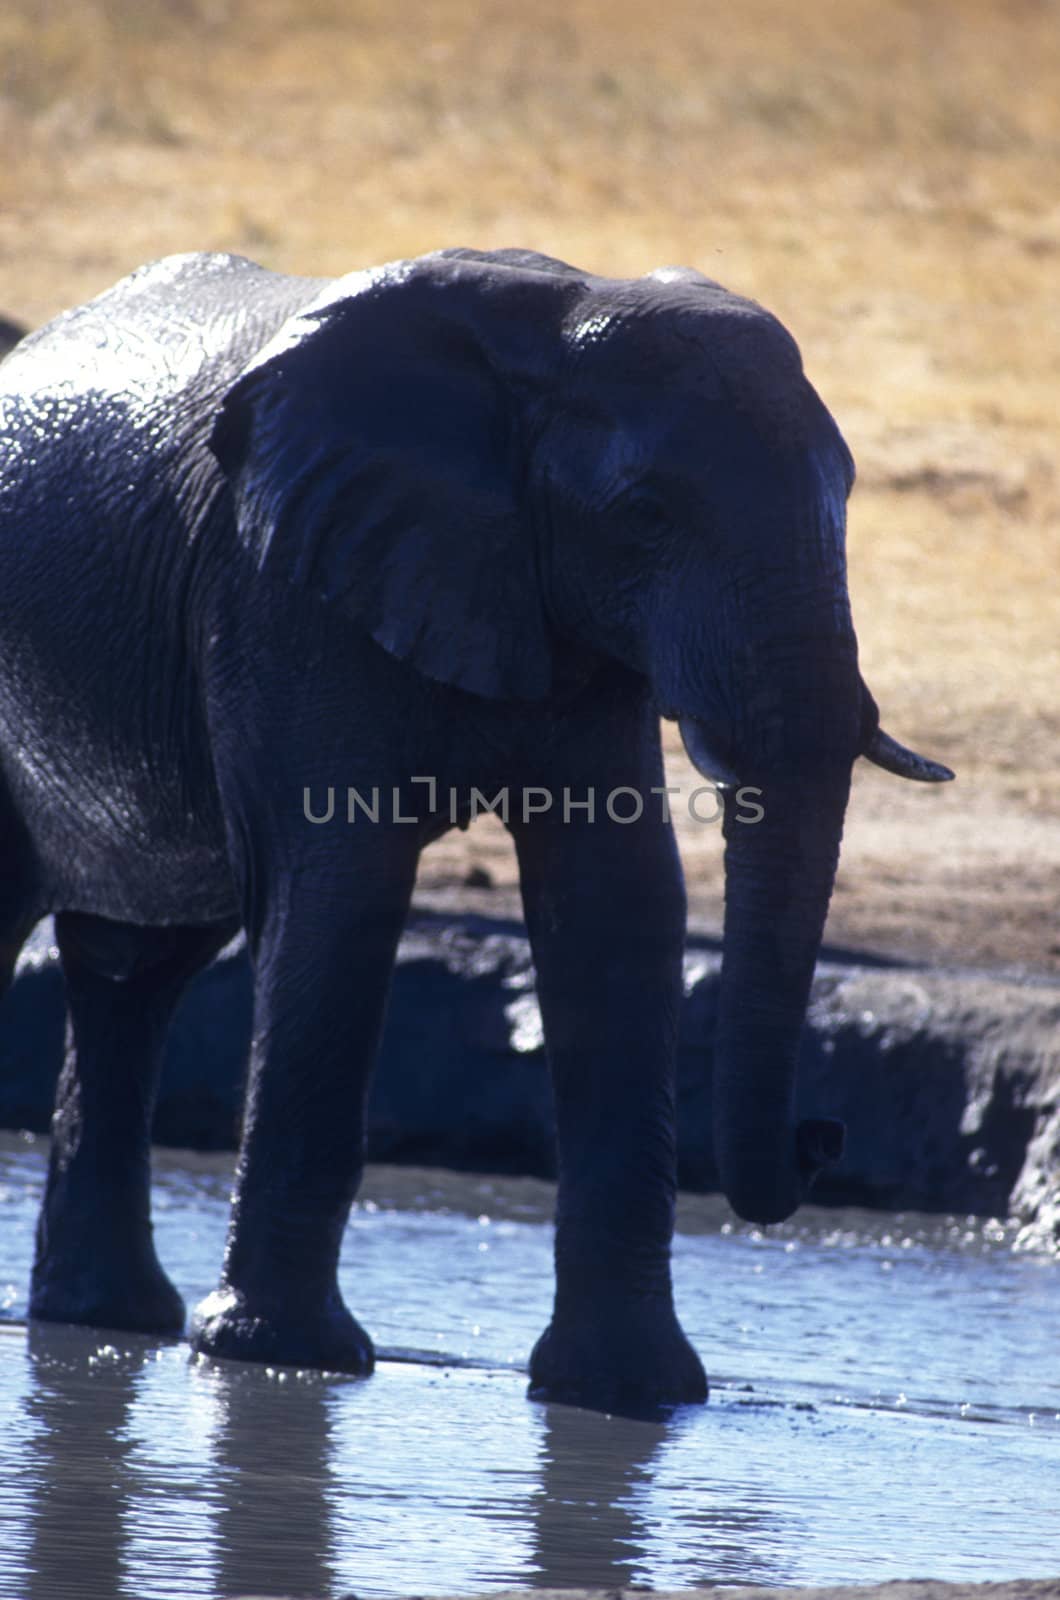 Adult elephant in shallow river looking for water.